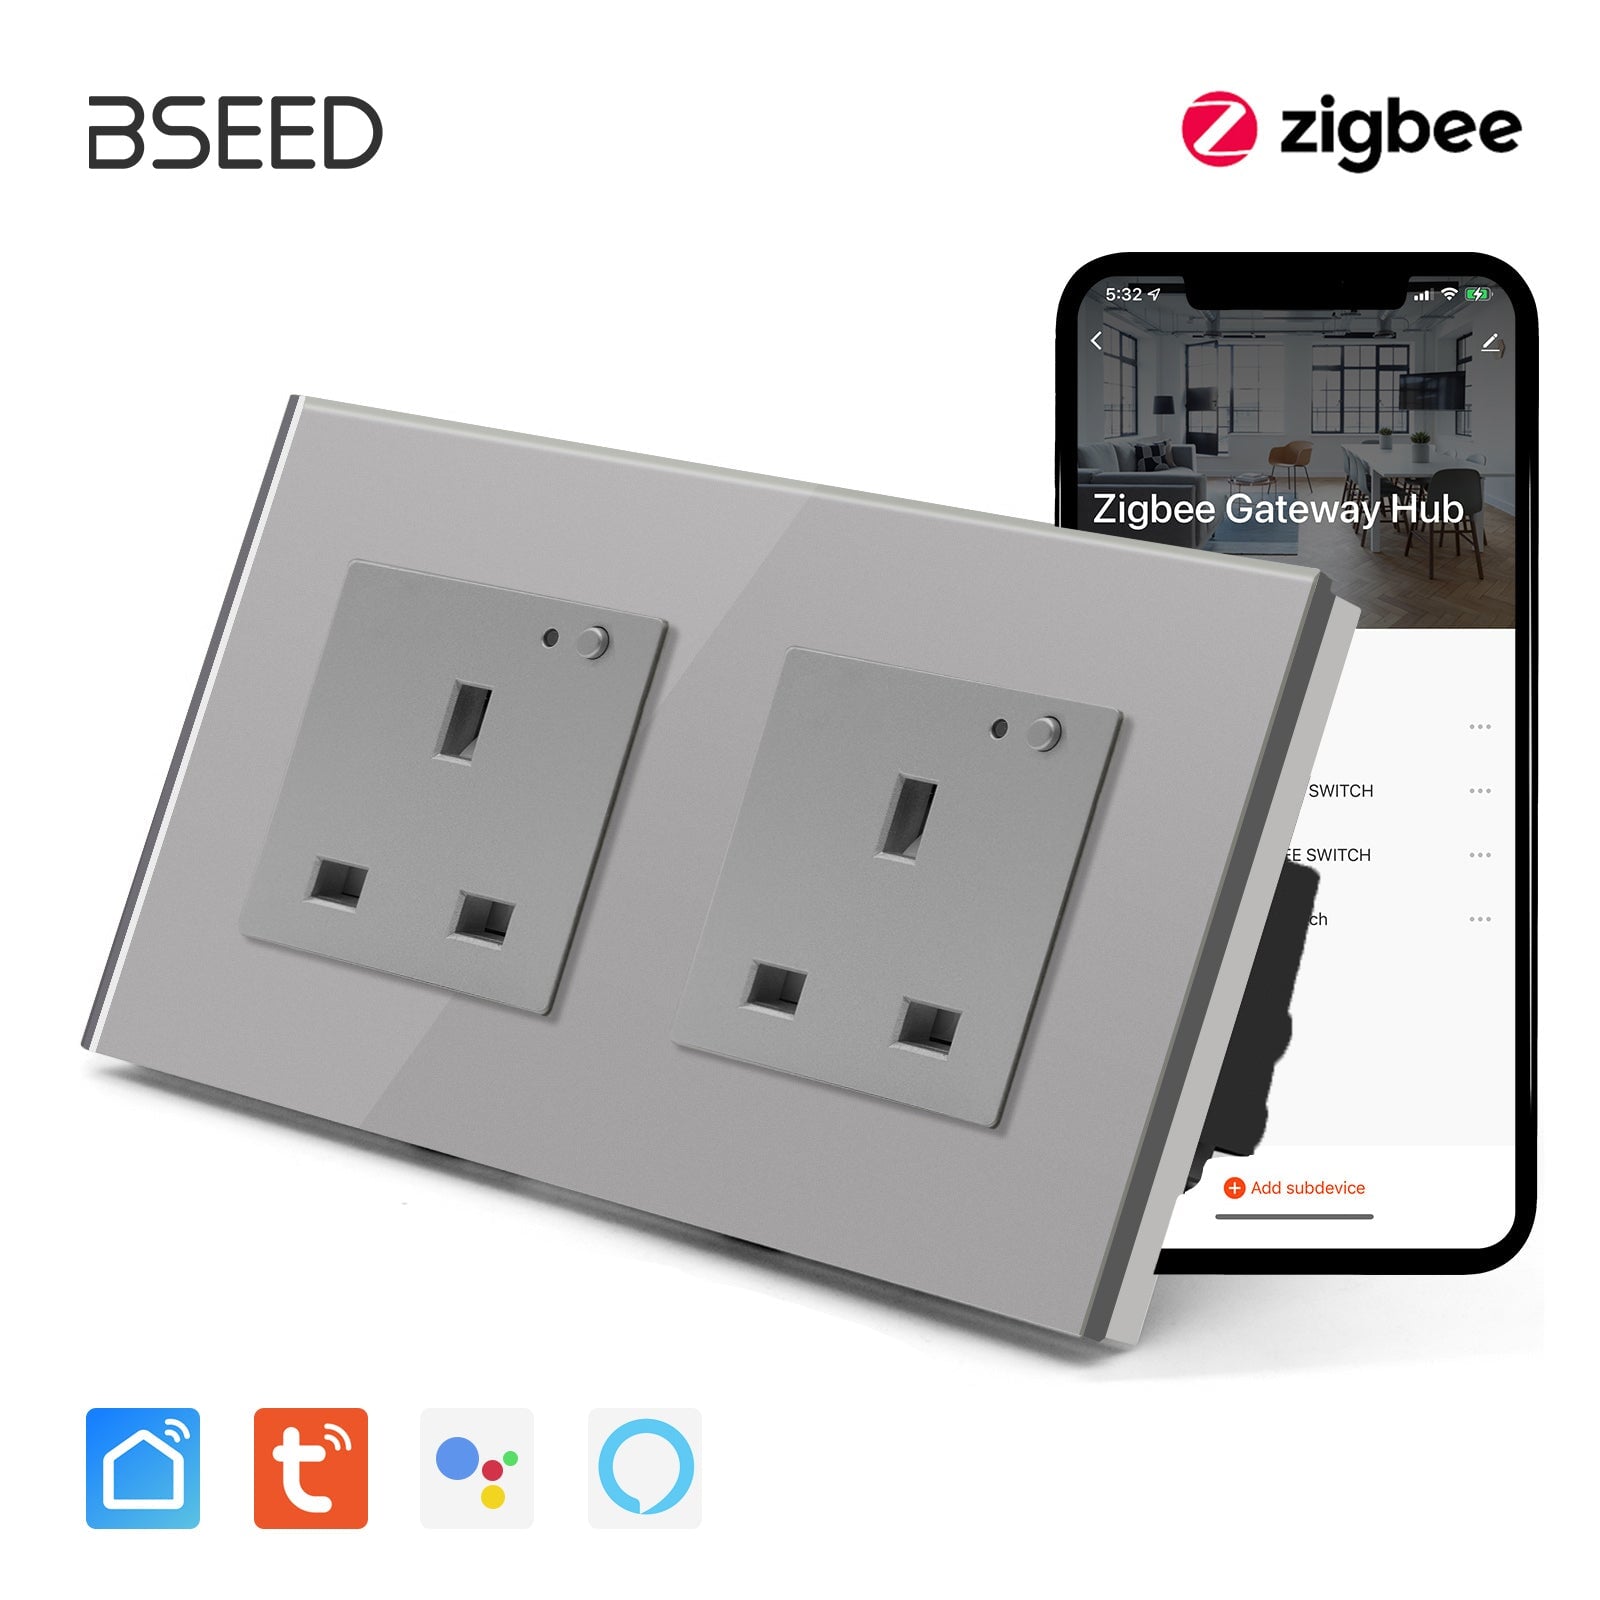 BSEED ZigBee UK Wall Sockets Power Outlets Kids Protection Wall Plates & Covers Bseedswitch grey Double 